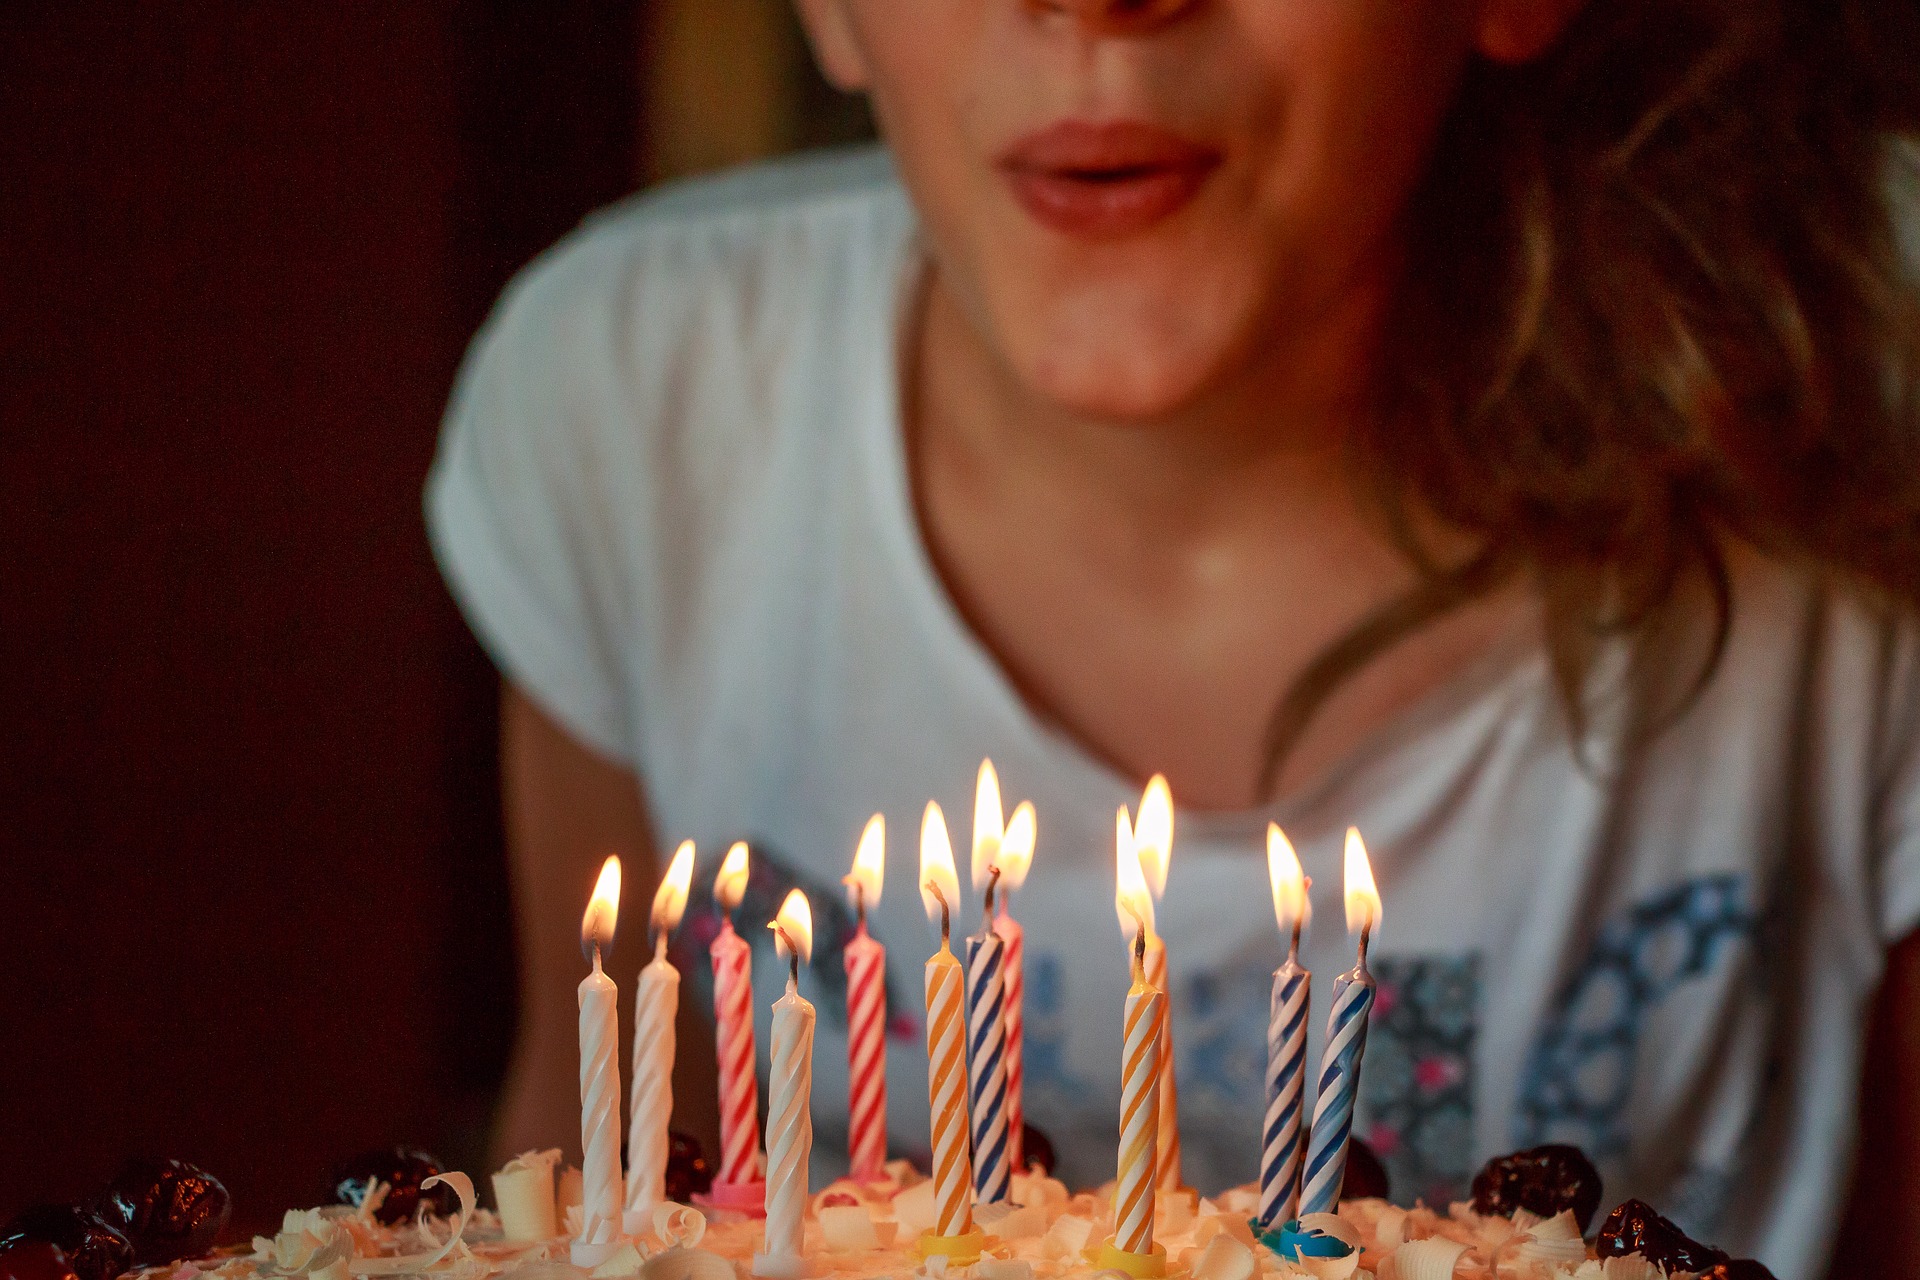 woman blowing candles in a cake